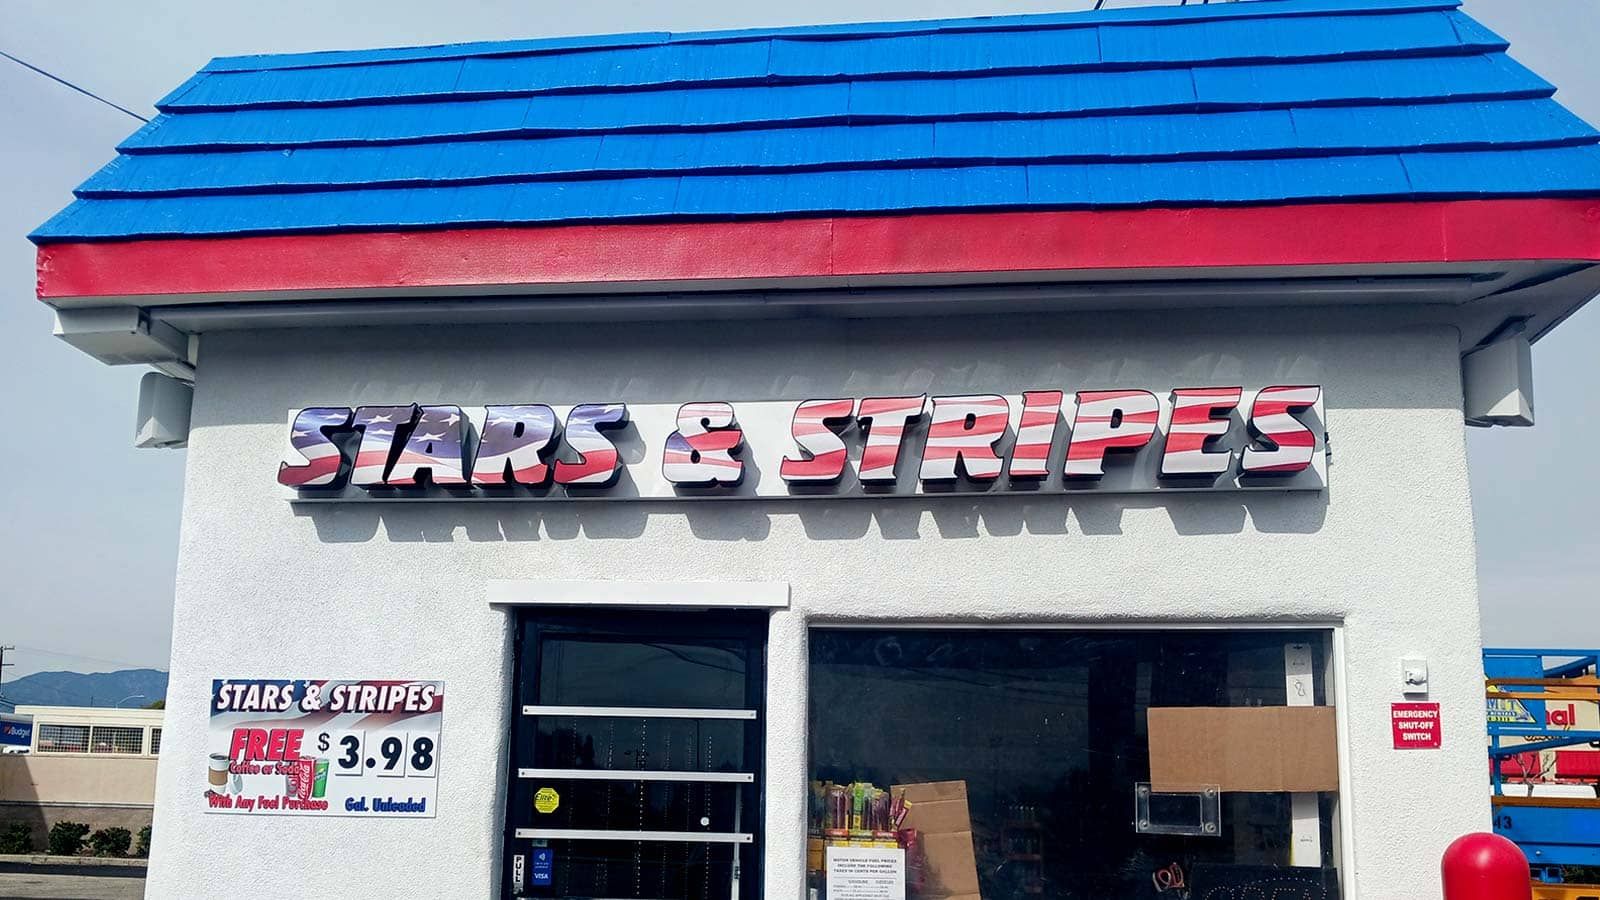 Stars and Stripes backlit letters attached to the storefront